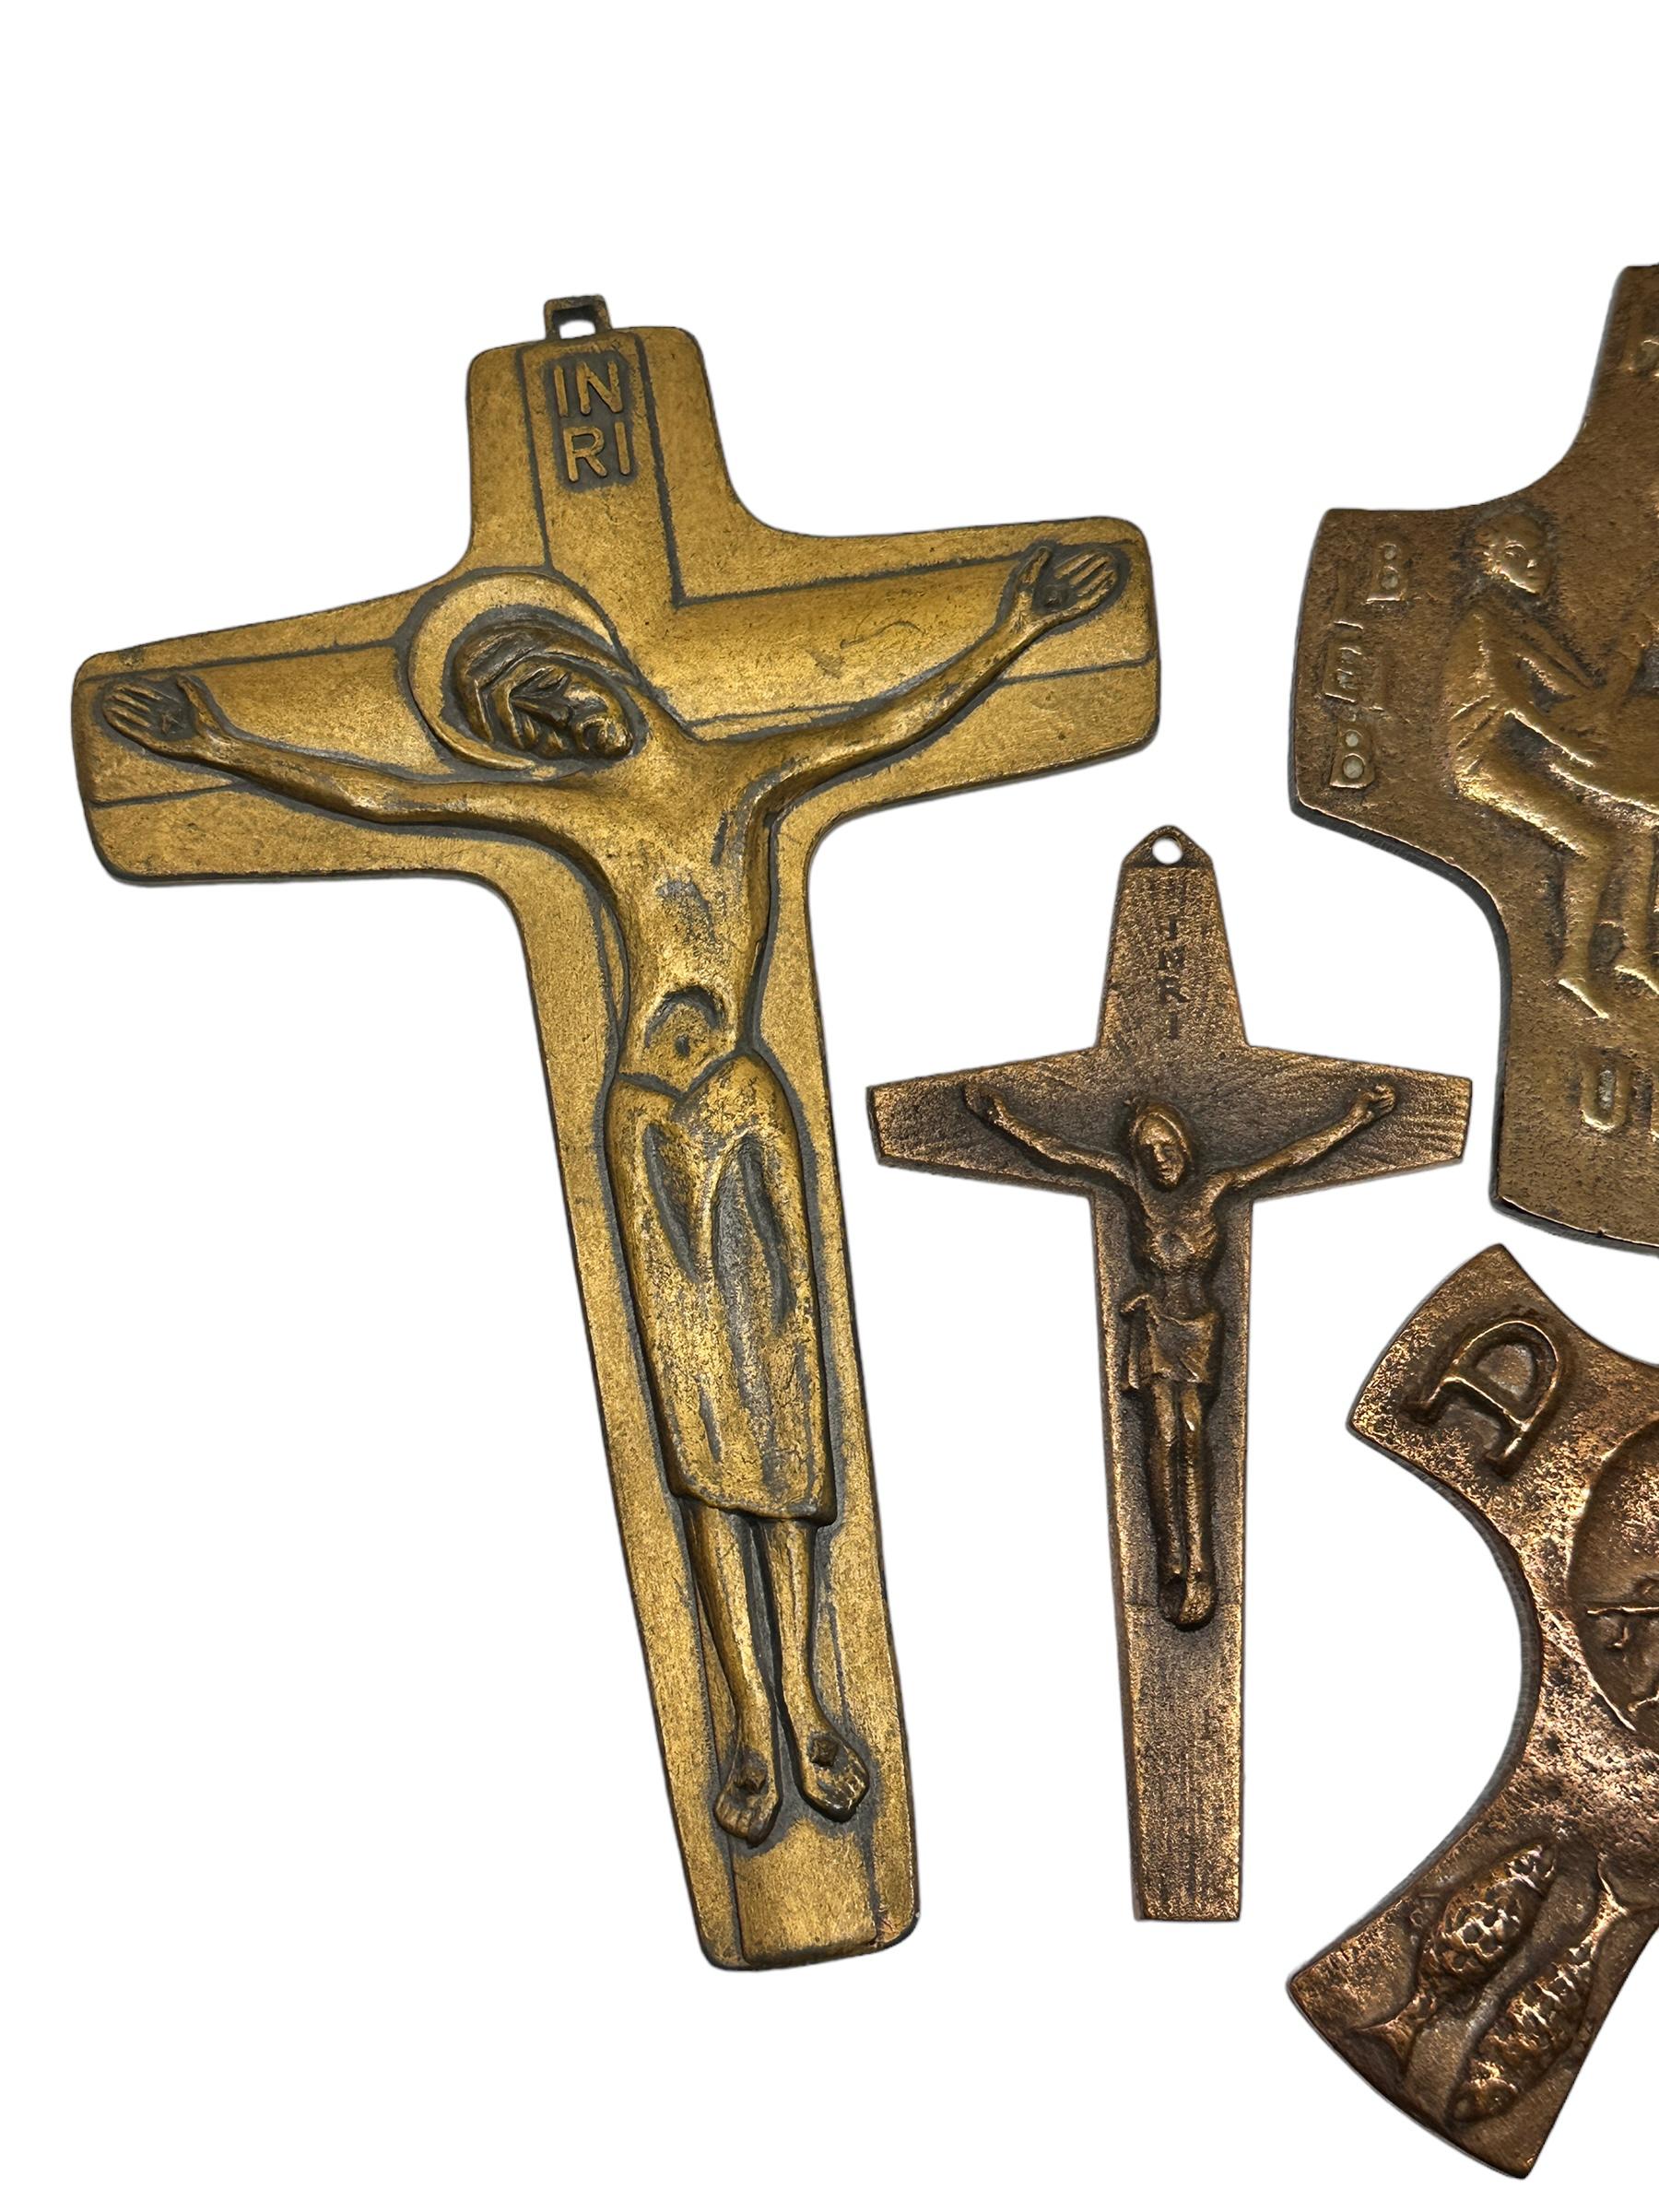 Mid-Century Modern Brutalist 1970s to 1980s German bronze Crosses for Wall Decoration. Found at an estate sale in Nuremberg, Germany. They are not marked, attributed to Egino Weinert. The size given in the dimensions section refers to the largest